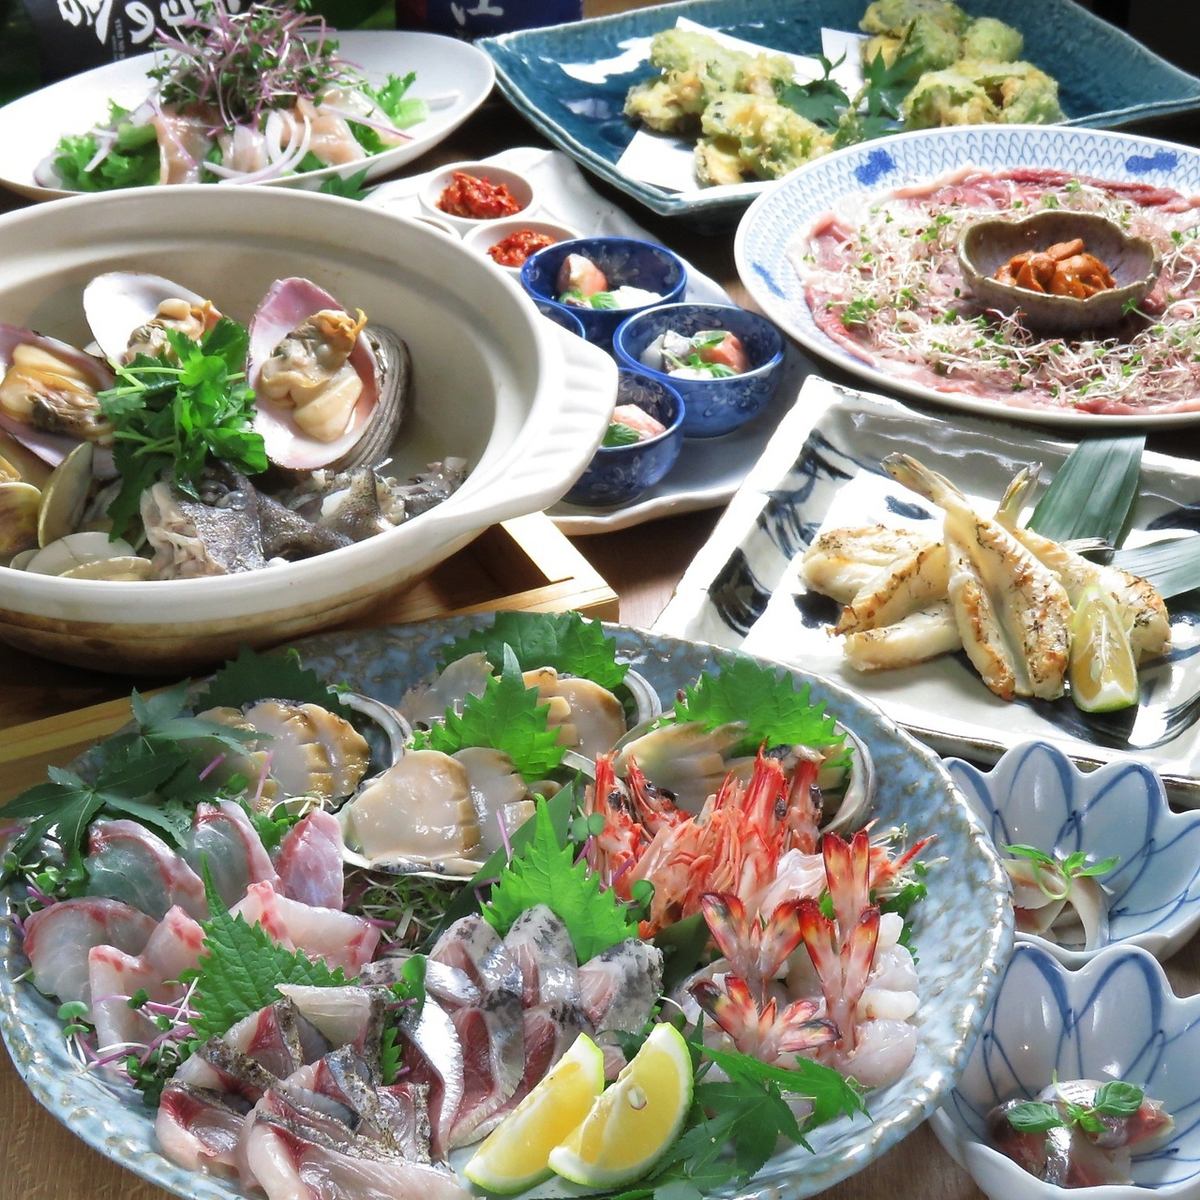 We offer a variety of dishes using local chicken from Oita and fresh fish delivered directly from the farm.